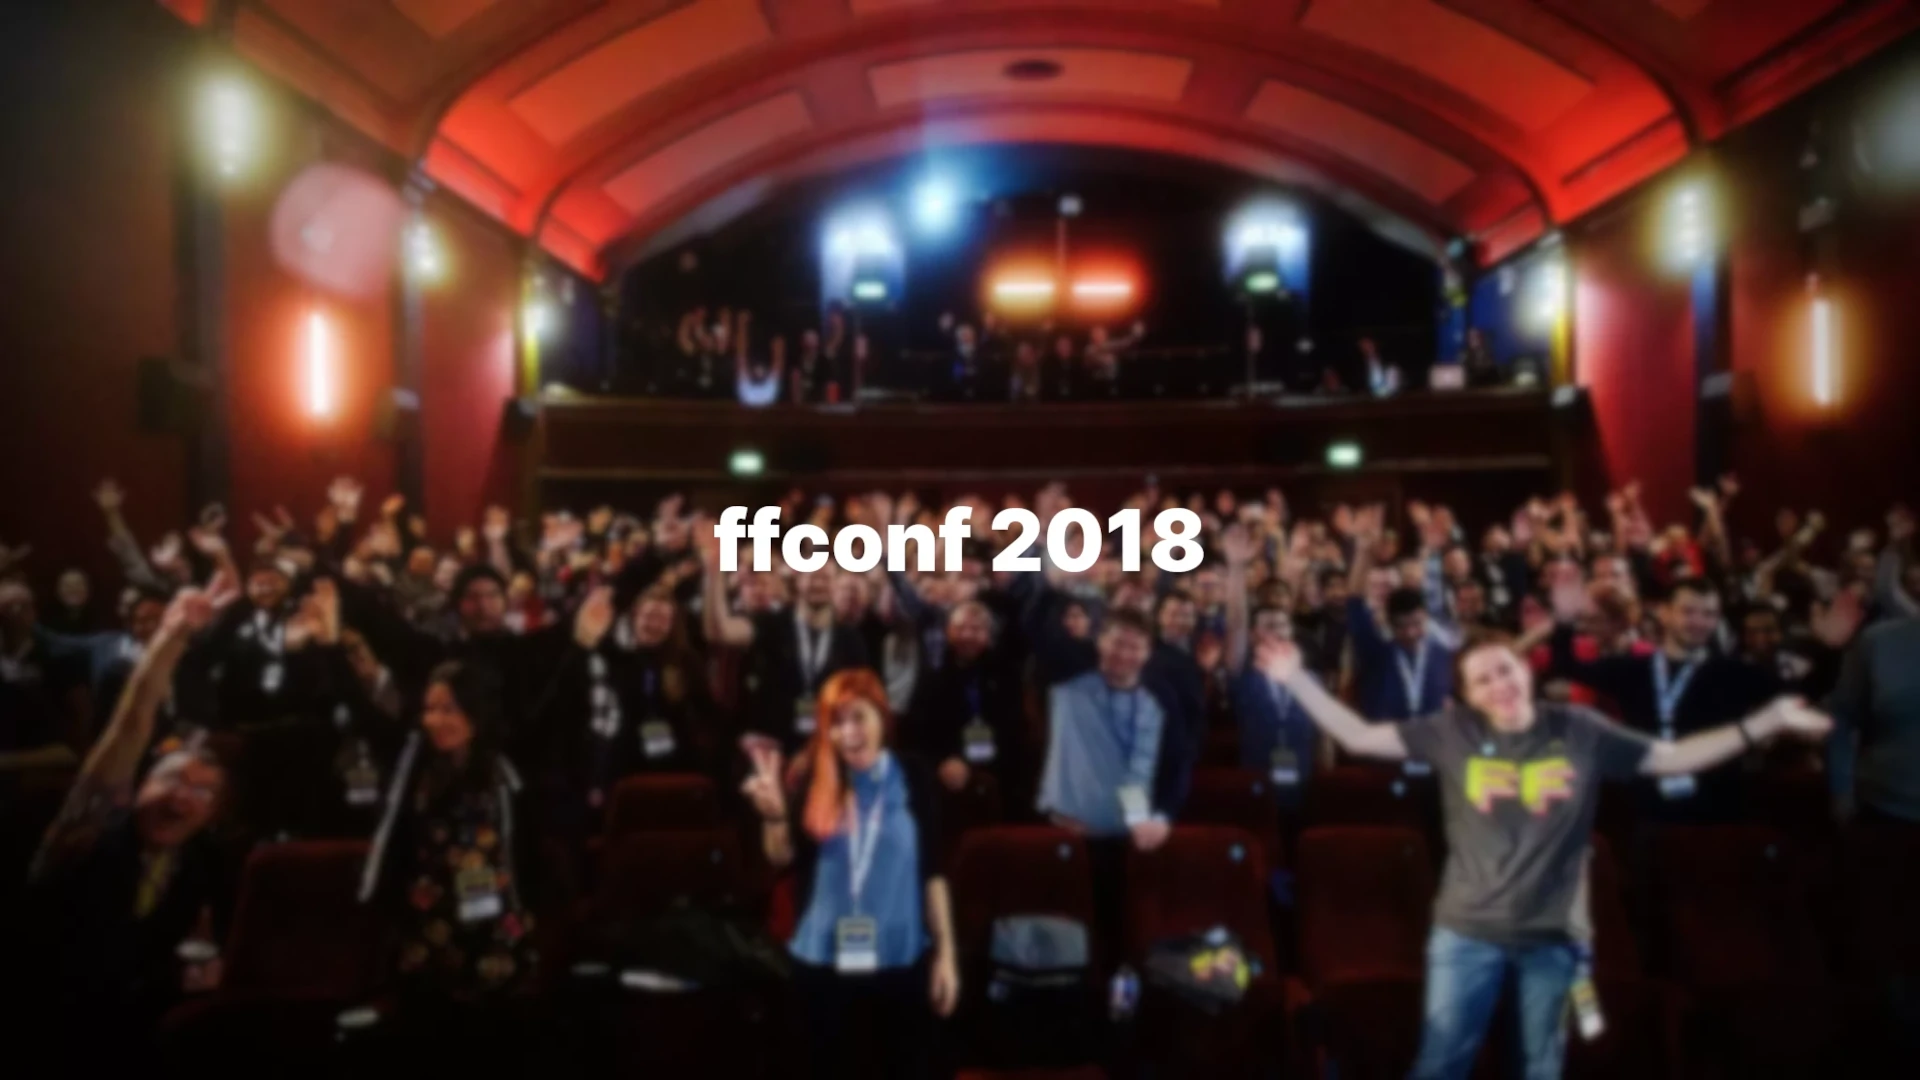 4 things I learned at ffconf 2018